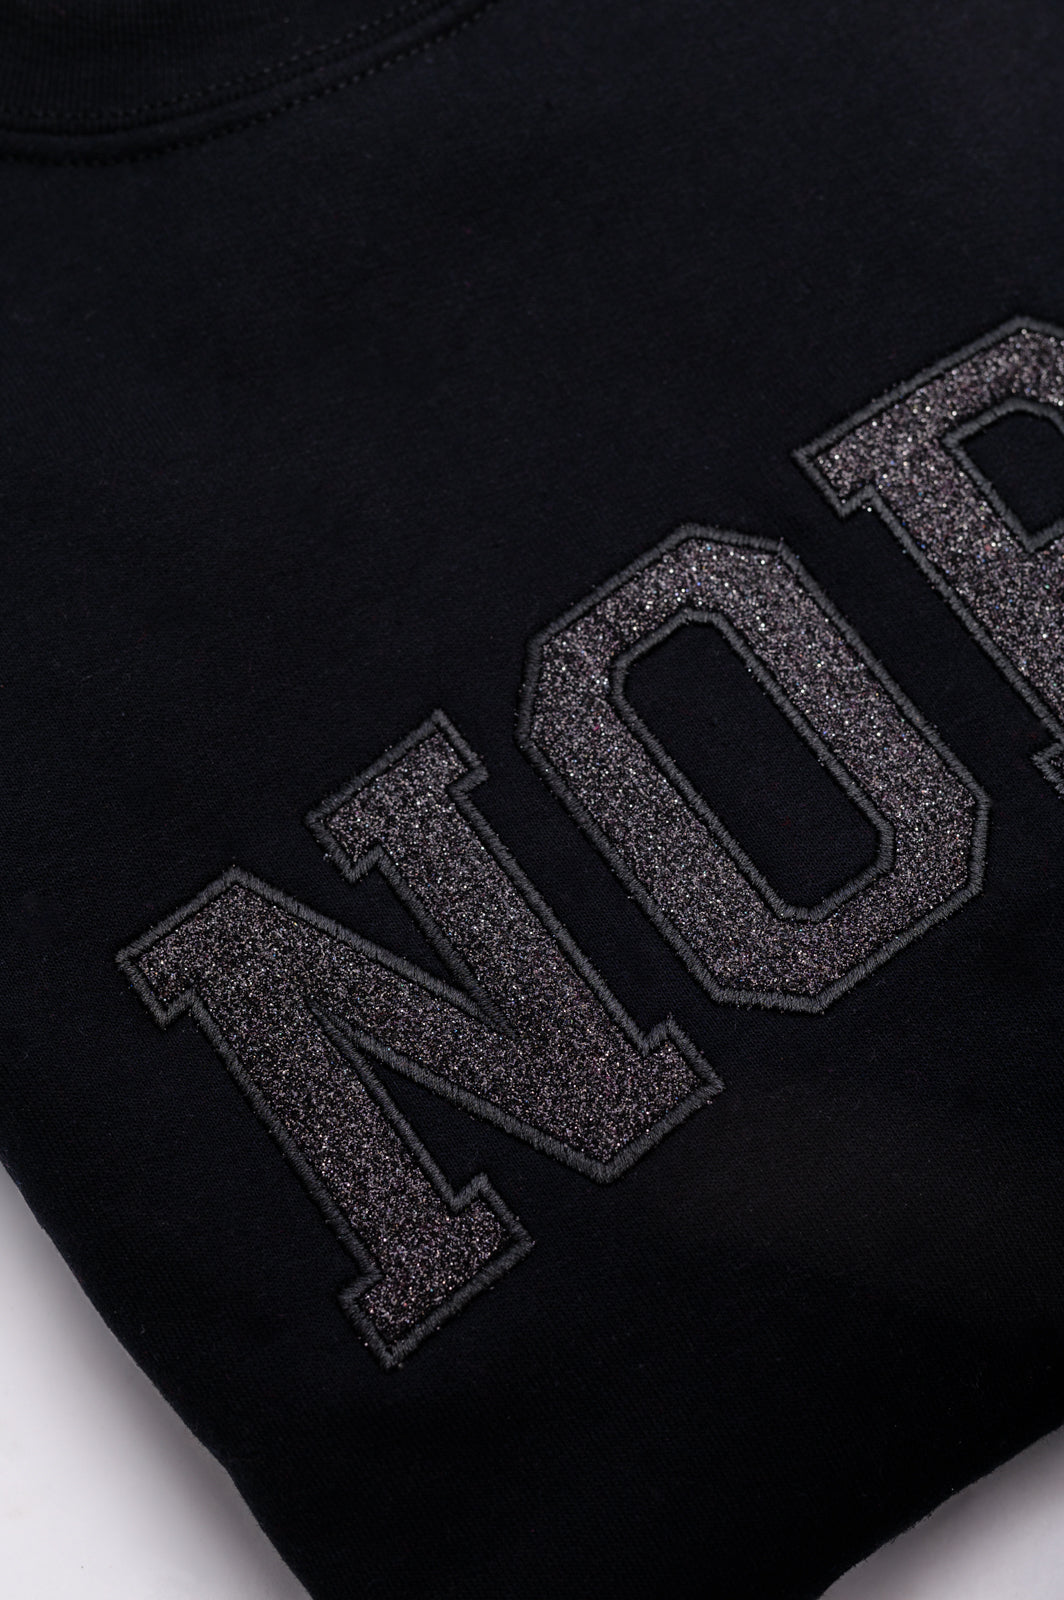 PREORDER: Embroidered Nope Glitter Sweatshirt in Four Colors